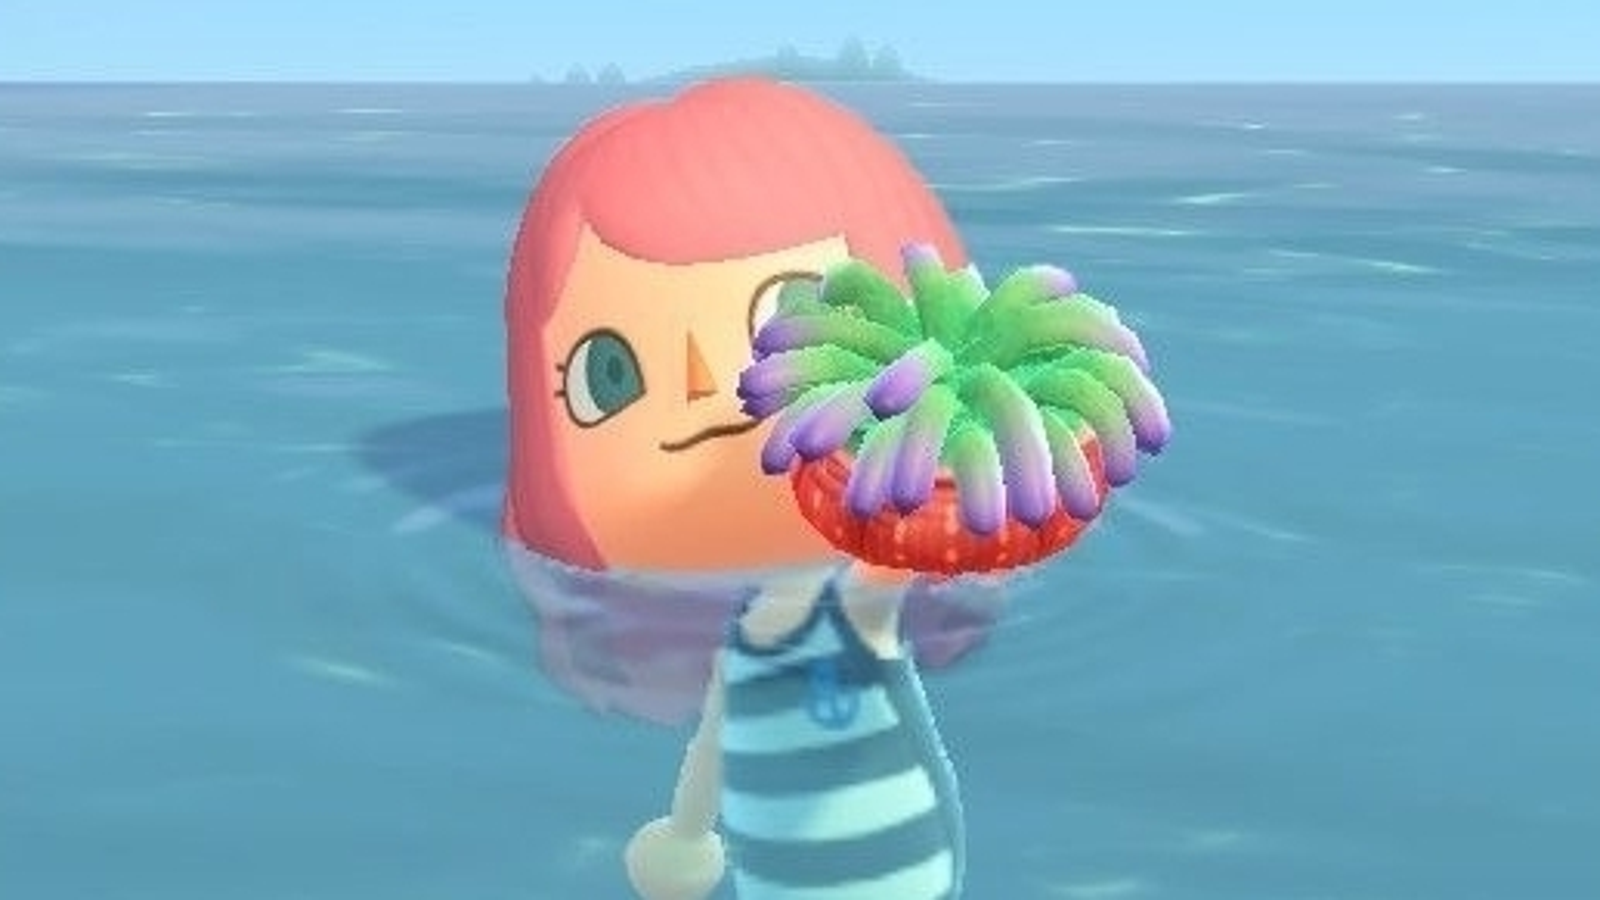 Animal Crossing New Horizons Sea Creatures July List for Northern